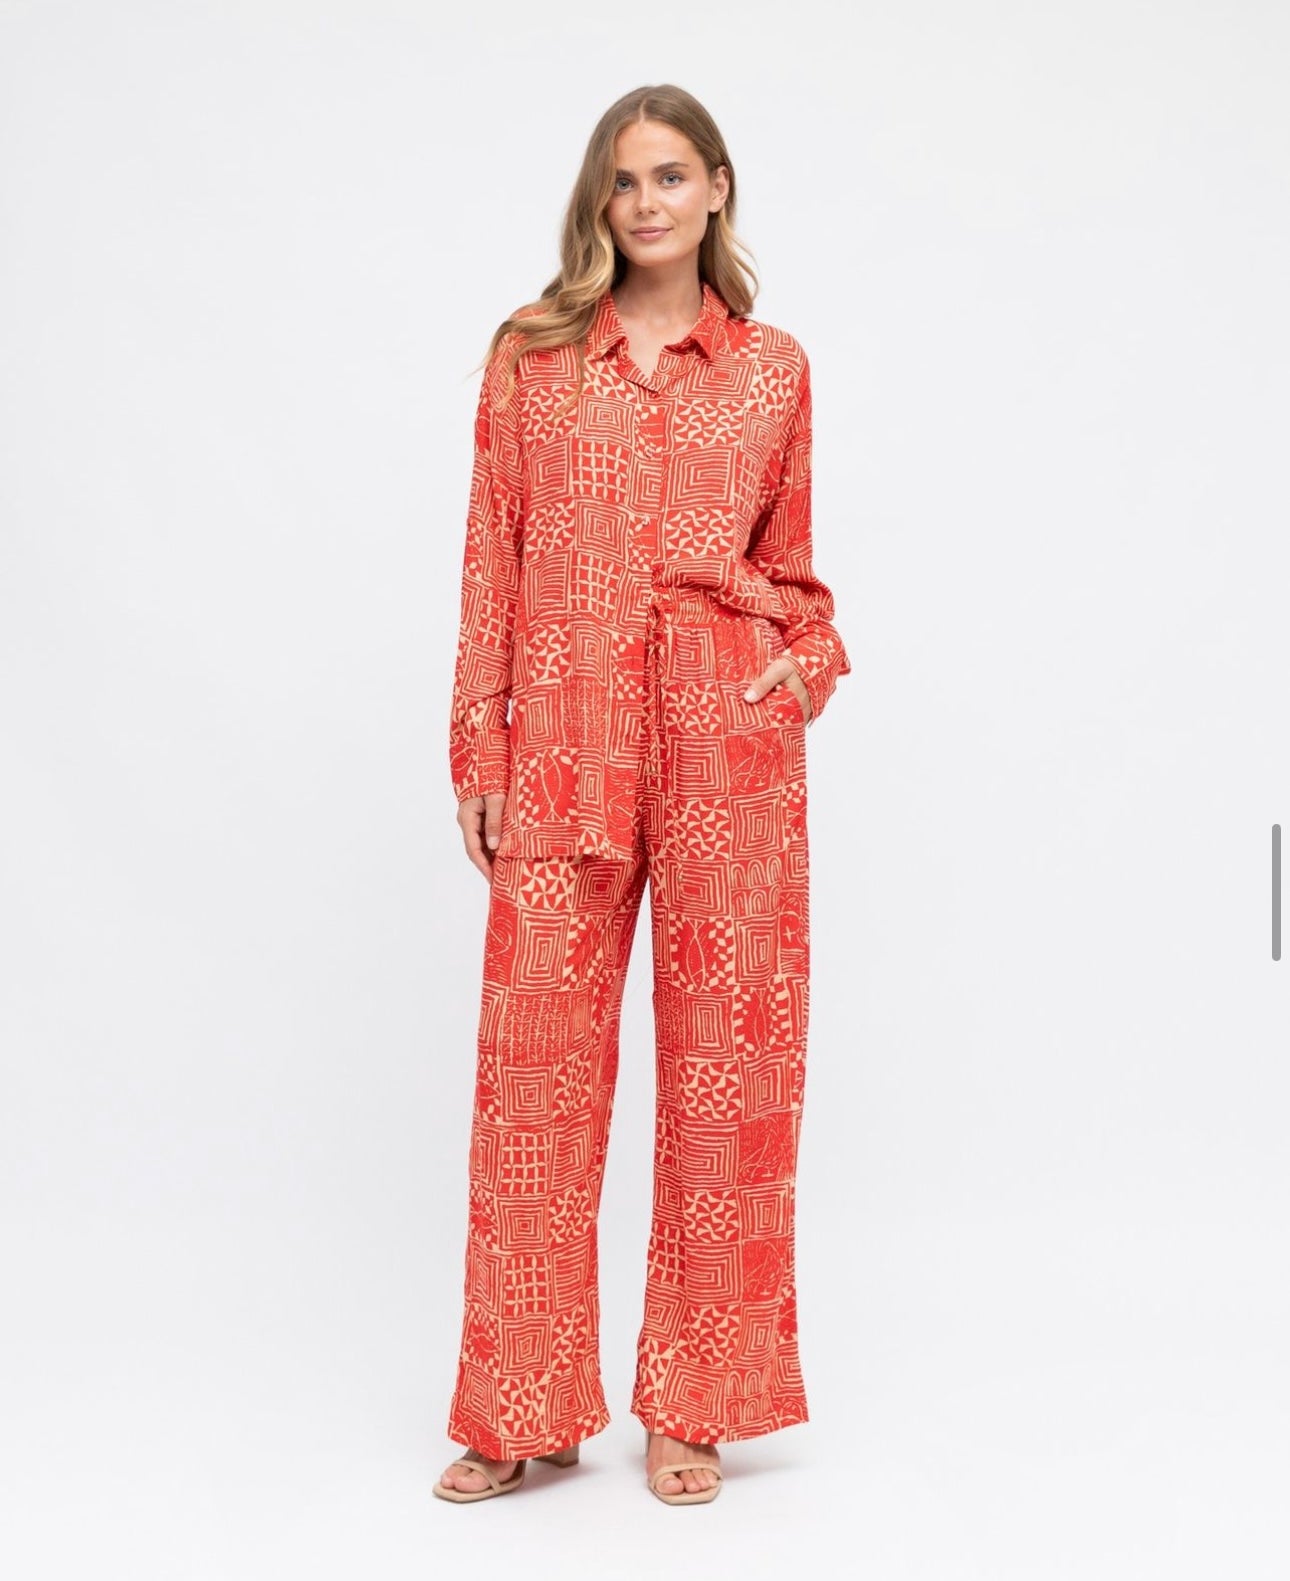 Morrie Button Oversized Shirt - Red Print